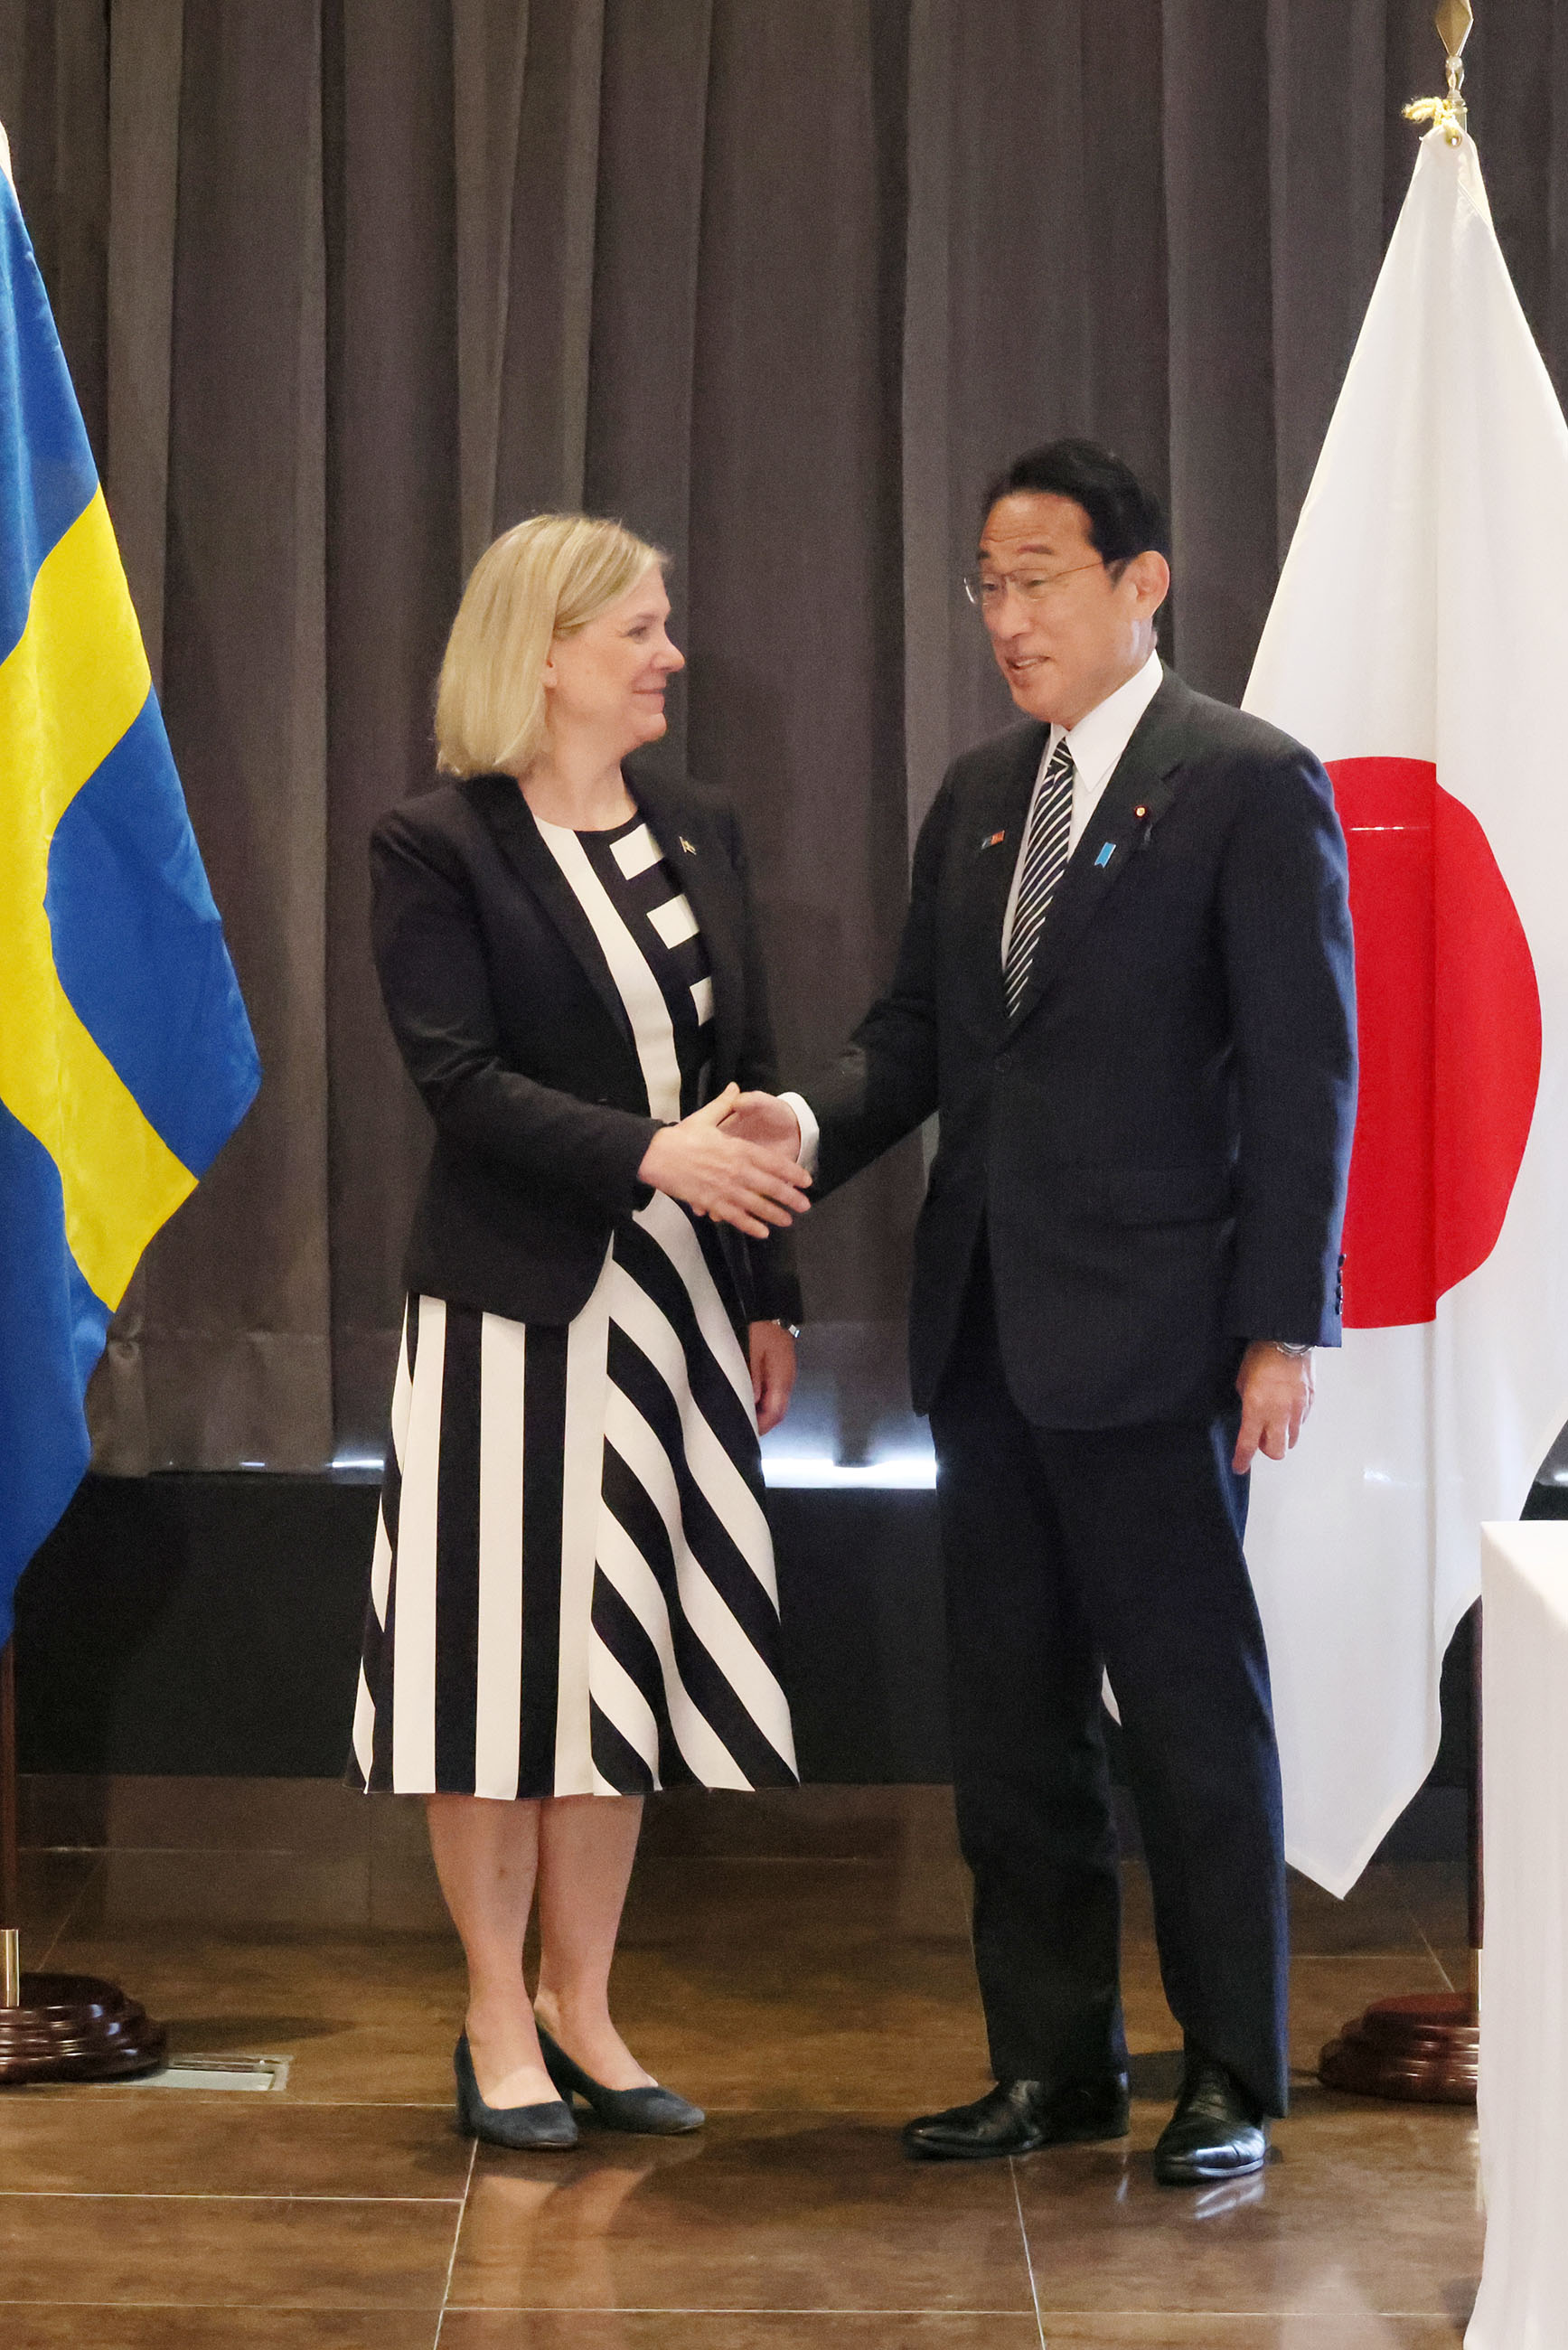 Prime Minister Kishida holding a meeting with Swedish Prime Minister Andersson (3)